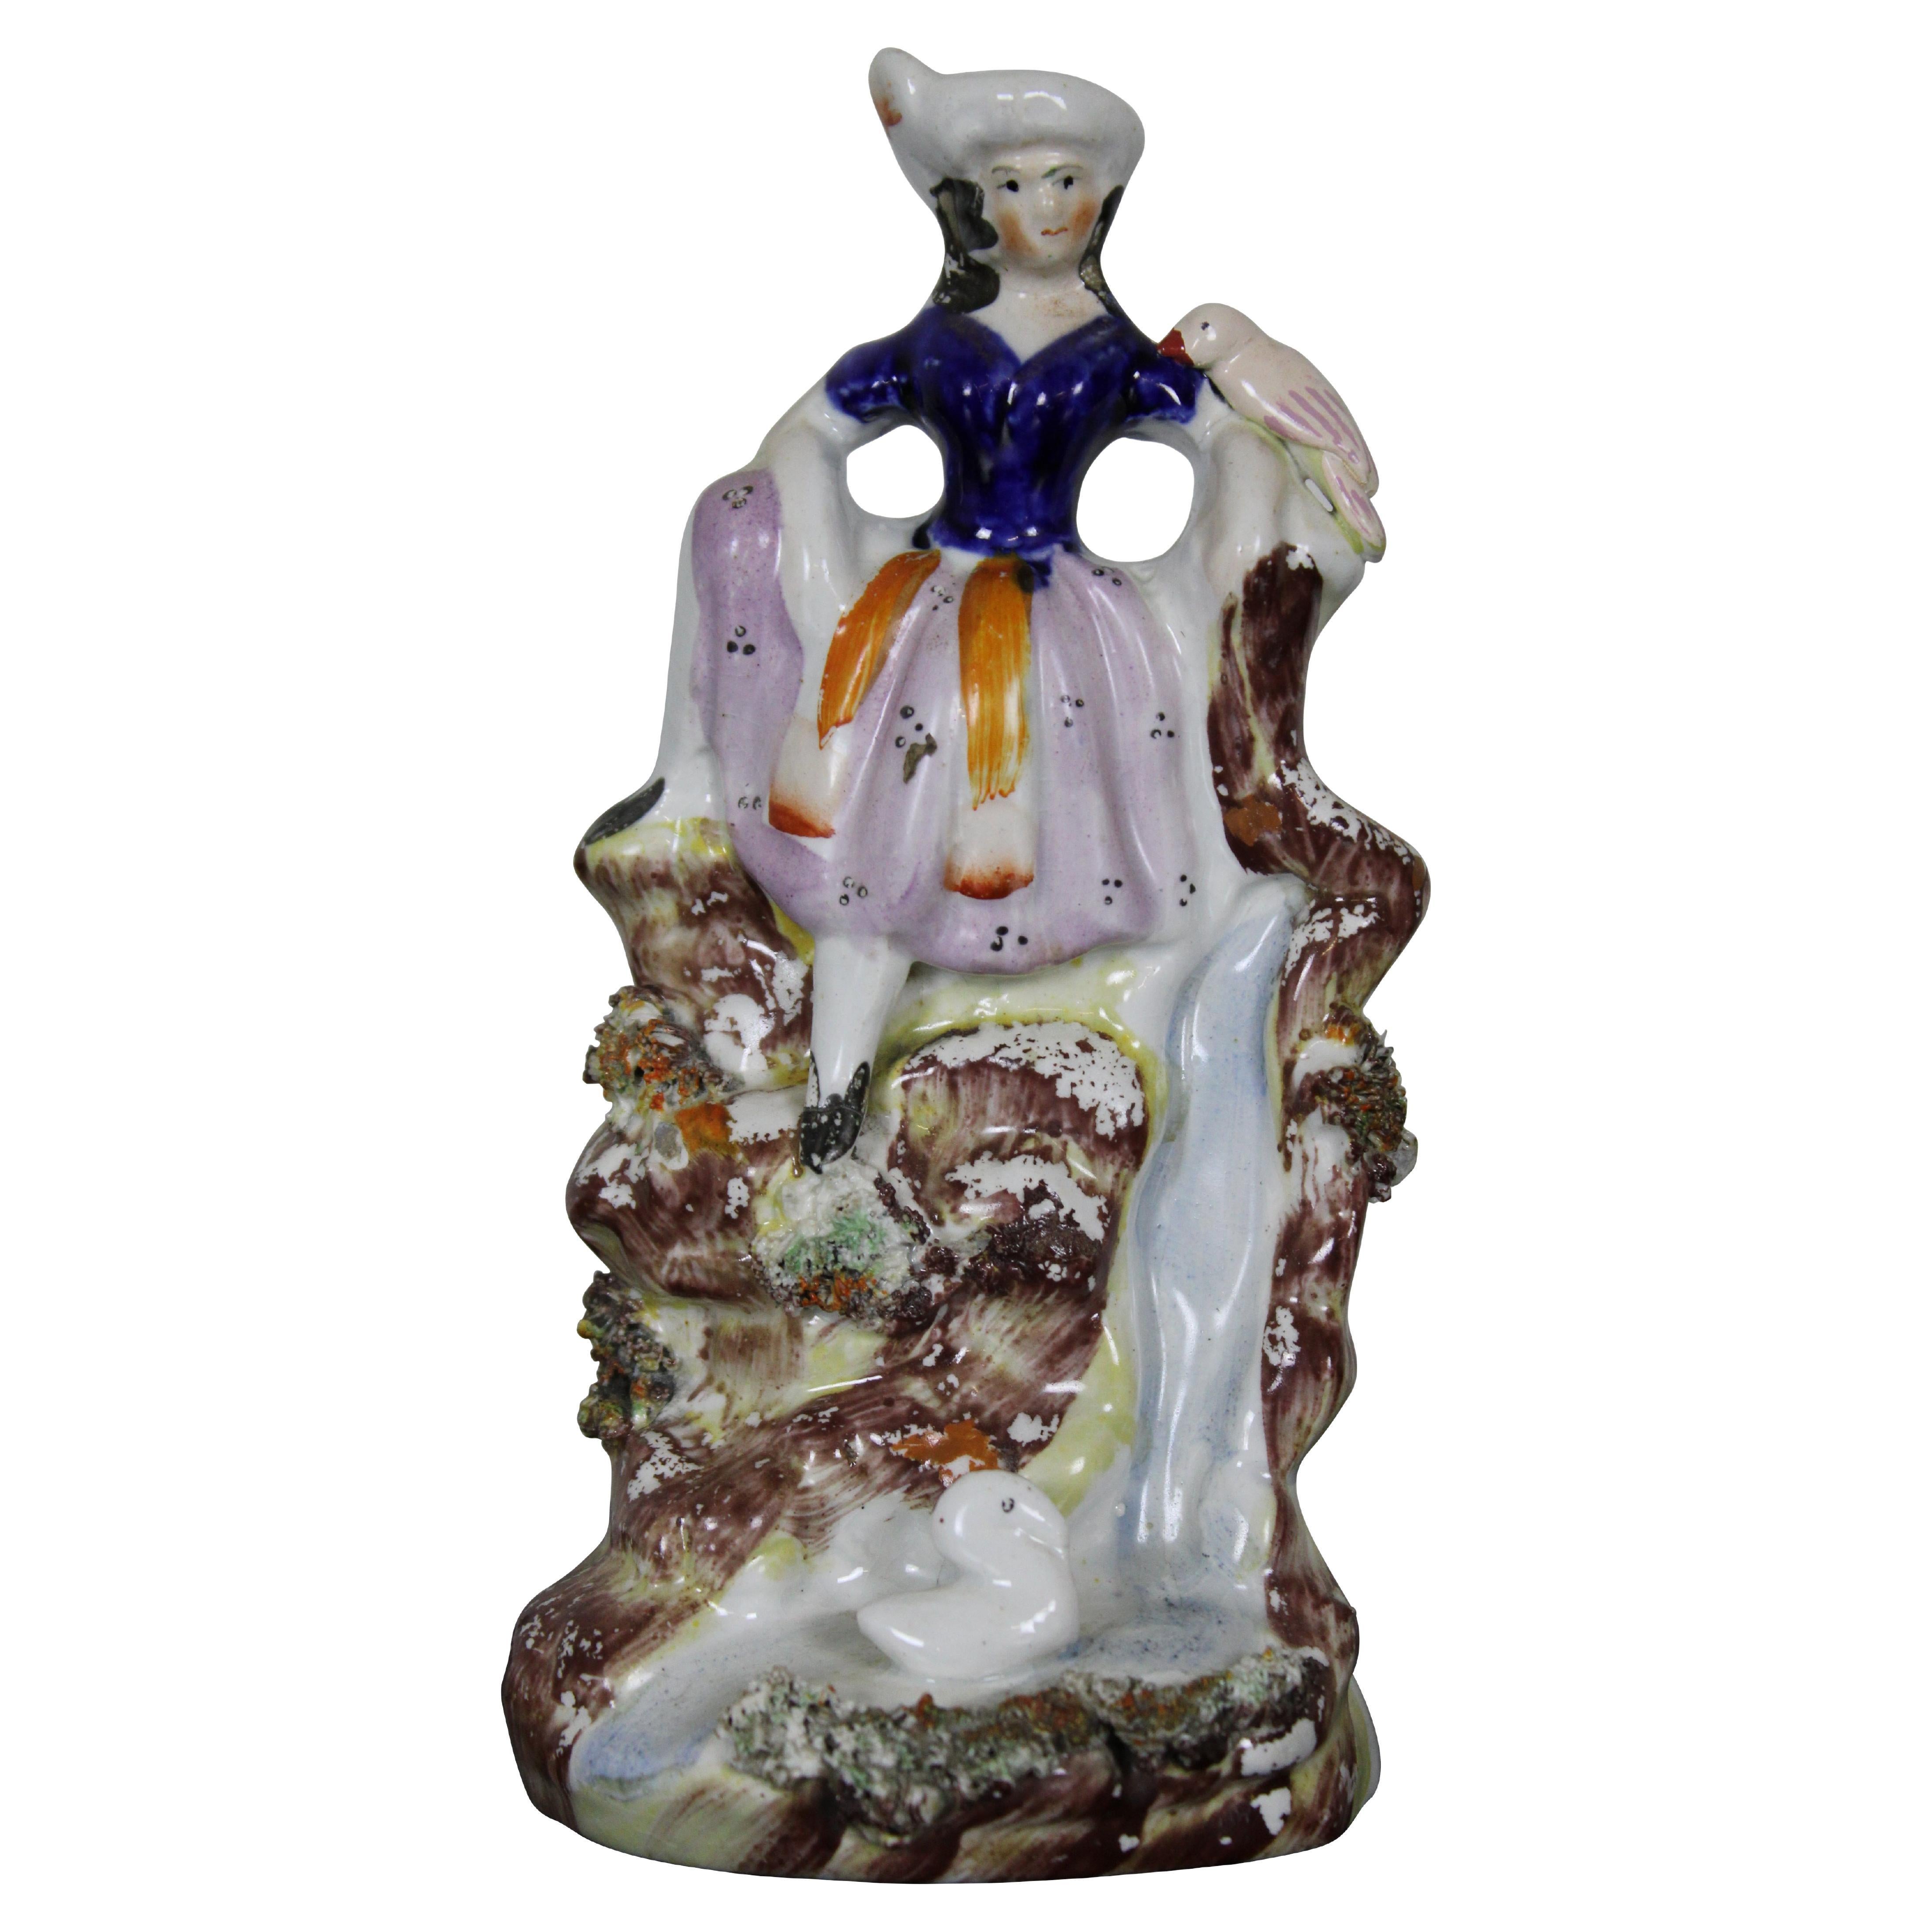 Antique English Staffordshire Porcelain Figurine Girl Seated on Waterfall Bird For Sale